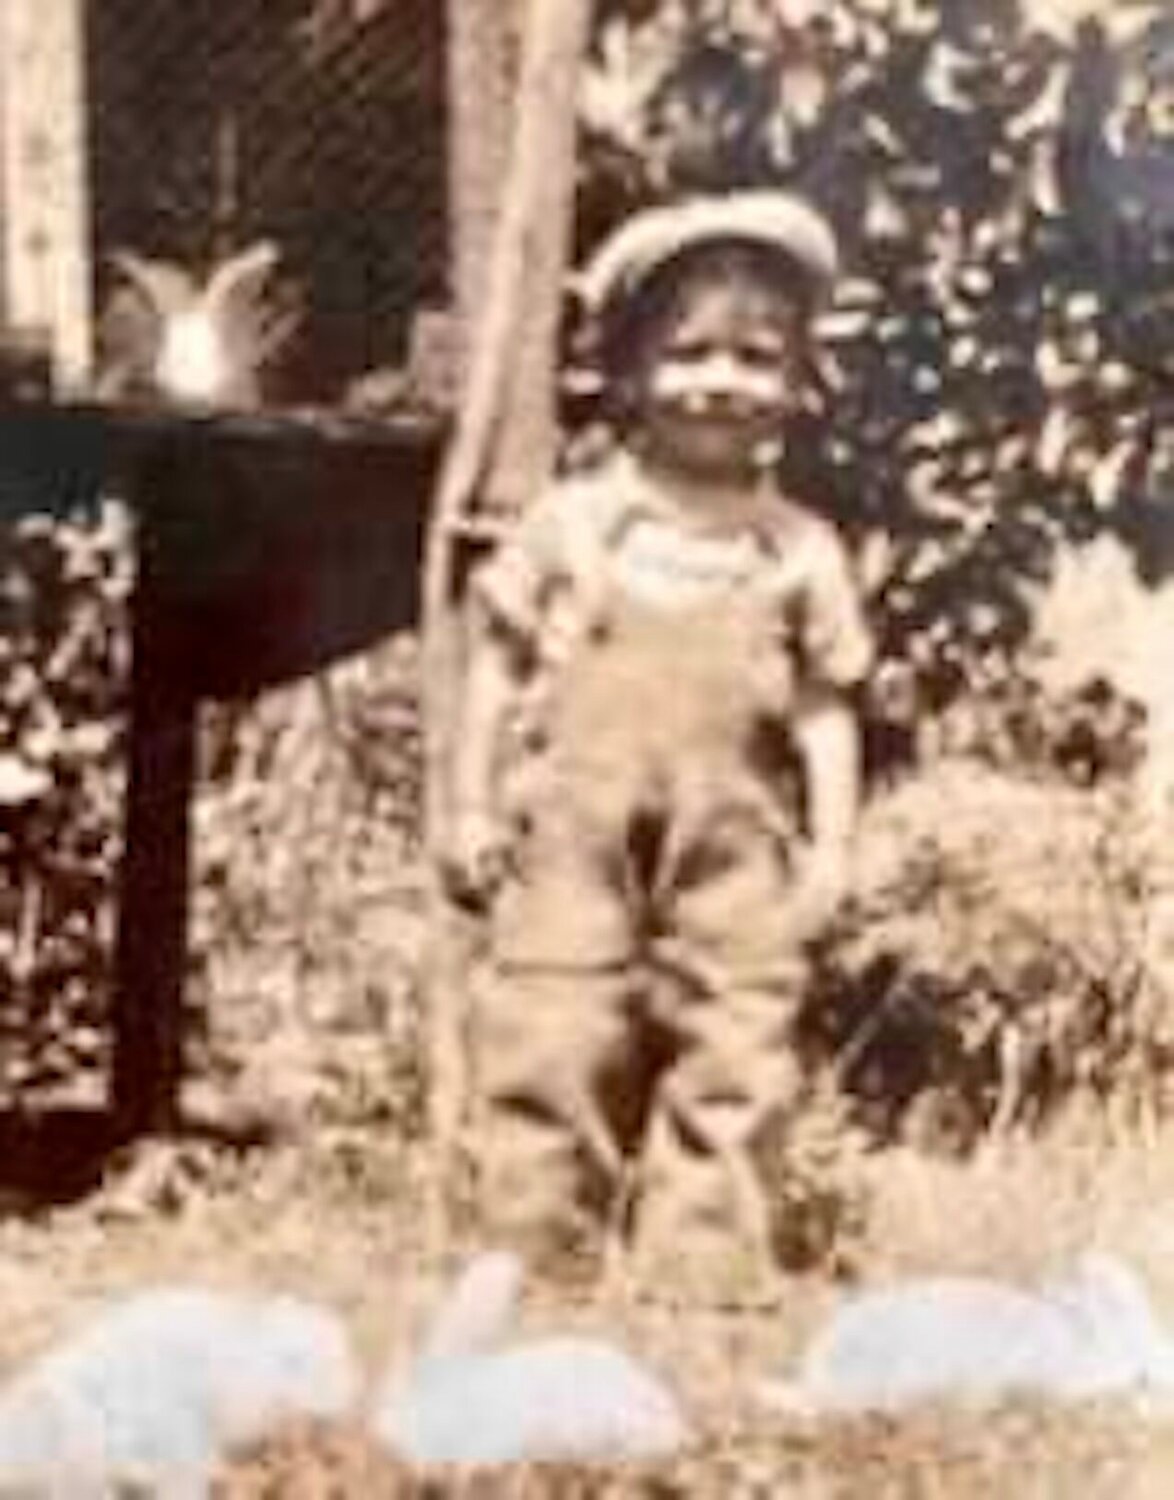 Bill as a young boy in growing up in Pomona.